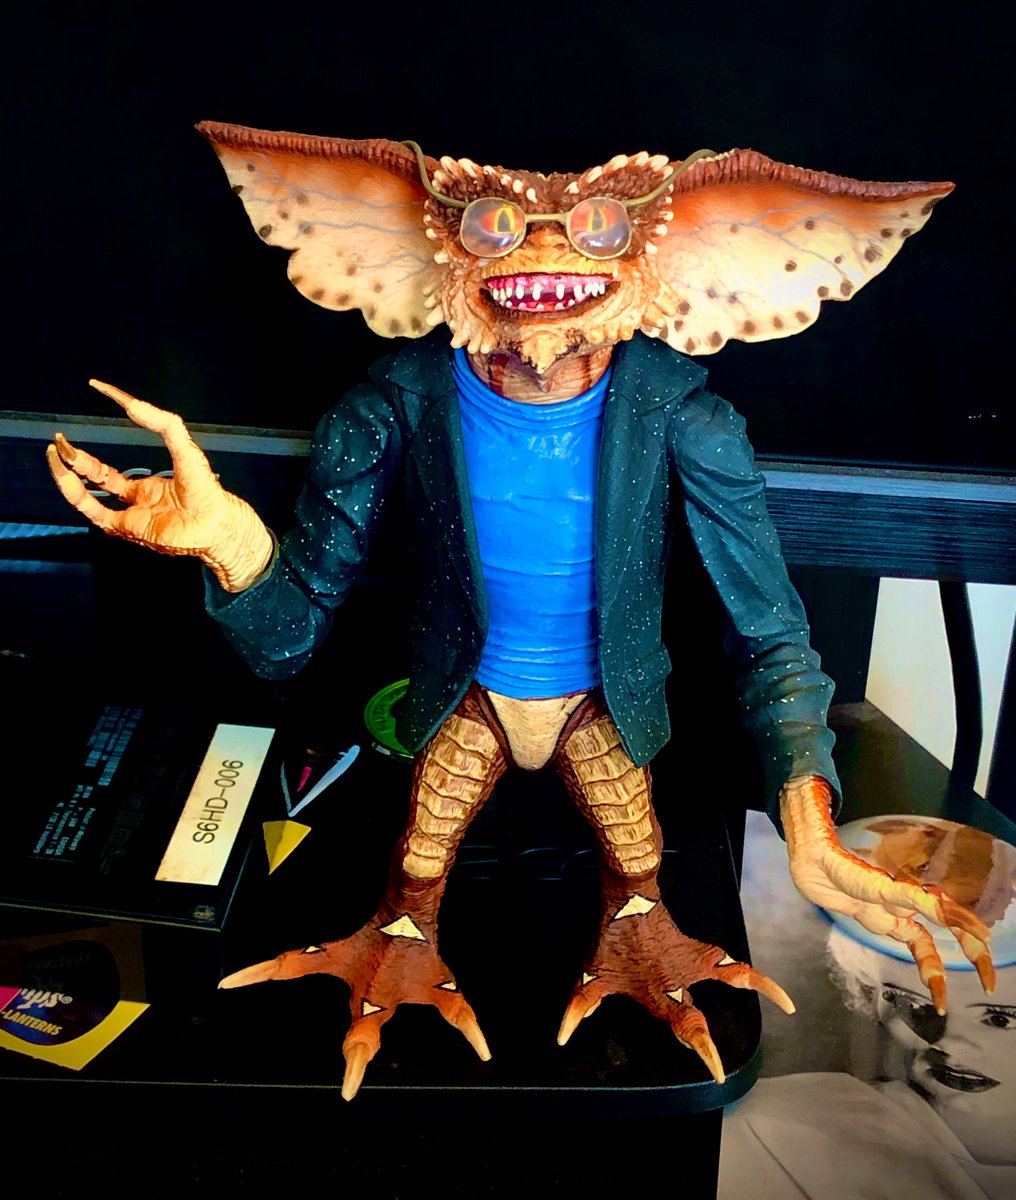 The Brain Gremlin from Gremlins 2 is your second official Gremlin Of The Day (GOTD). He’s wearing a blazer! Tune in to this thread tomorrow for another exciting daily gremlin